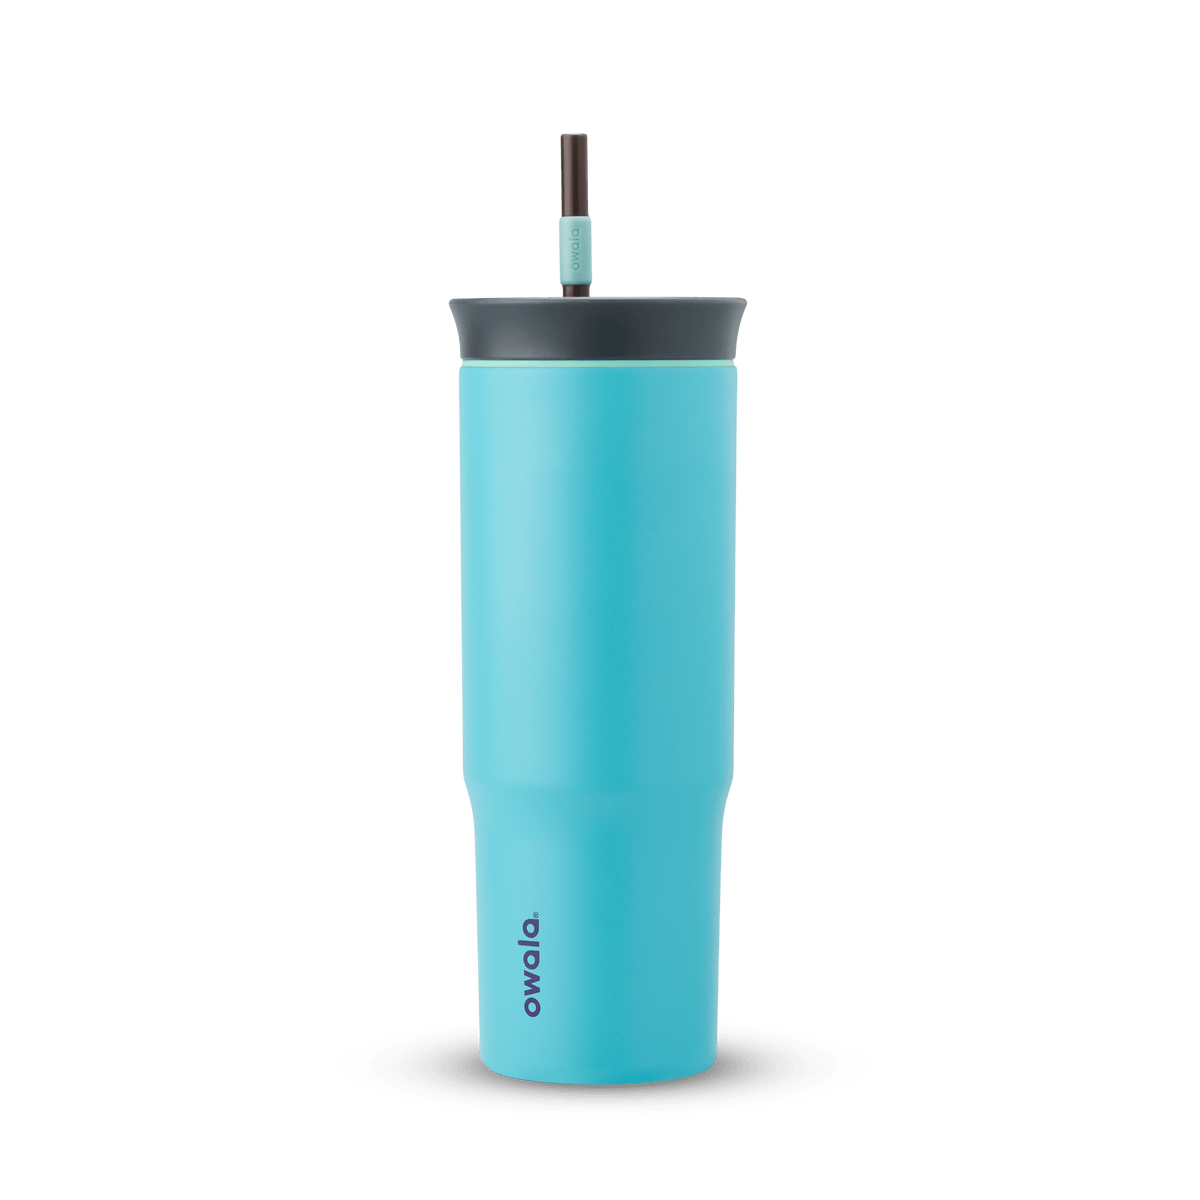 Owala Color of the Month Club Water Bottle Subscription Review